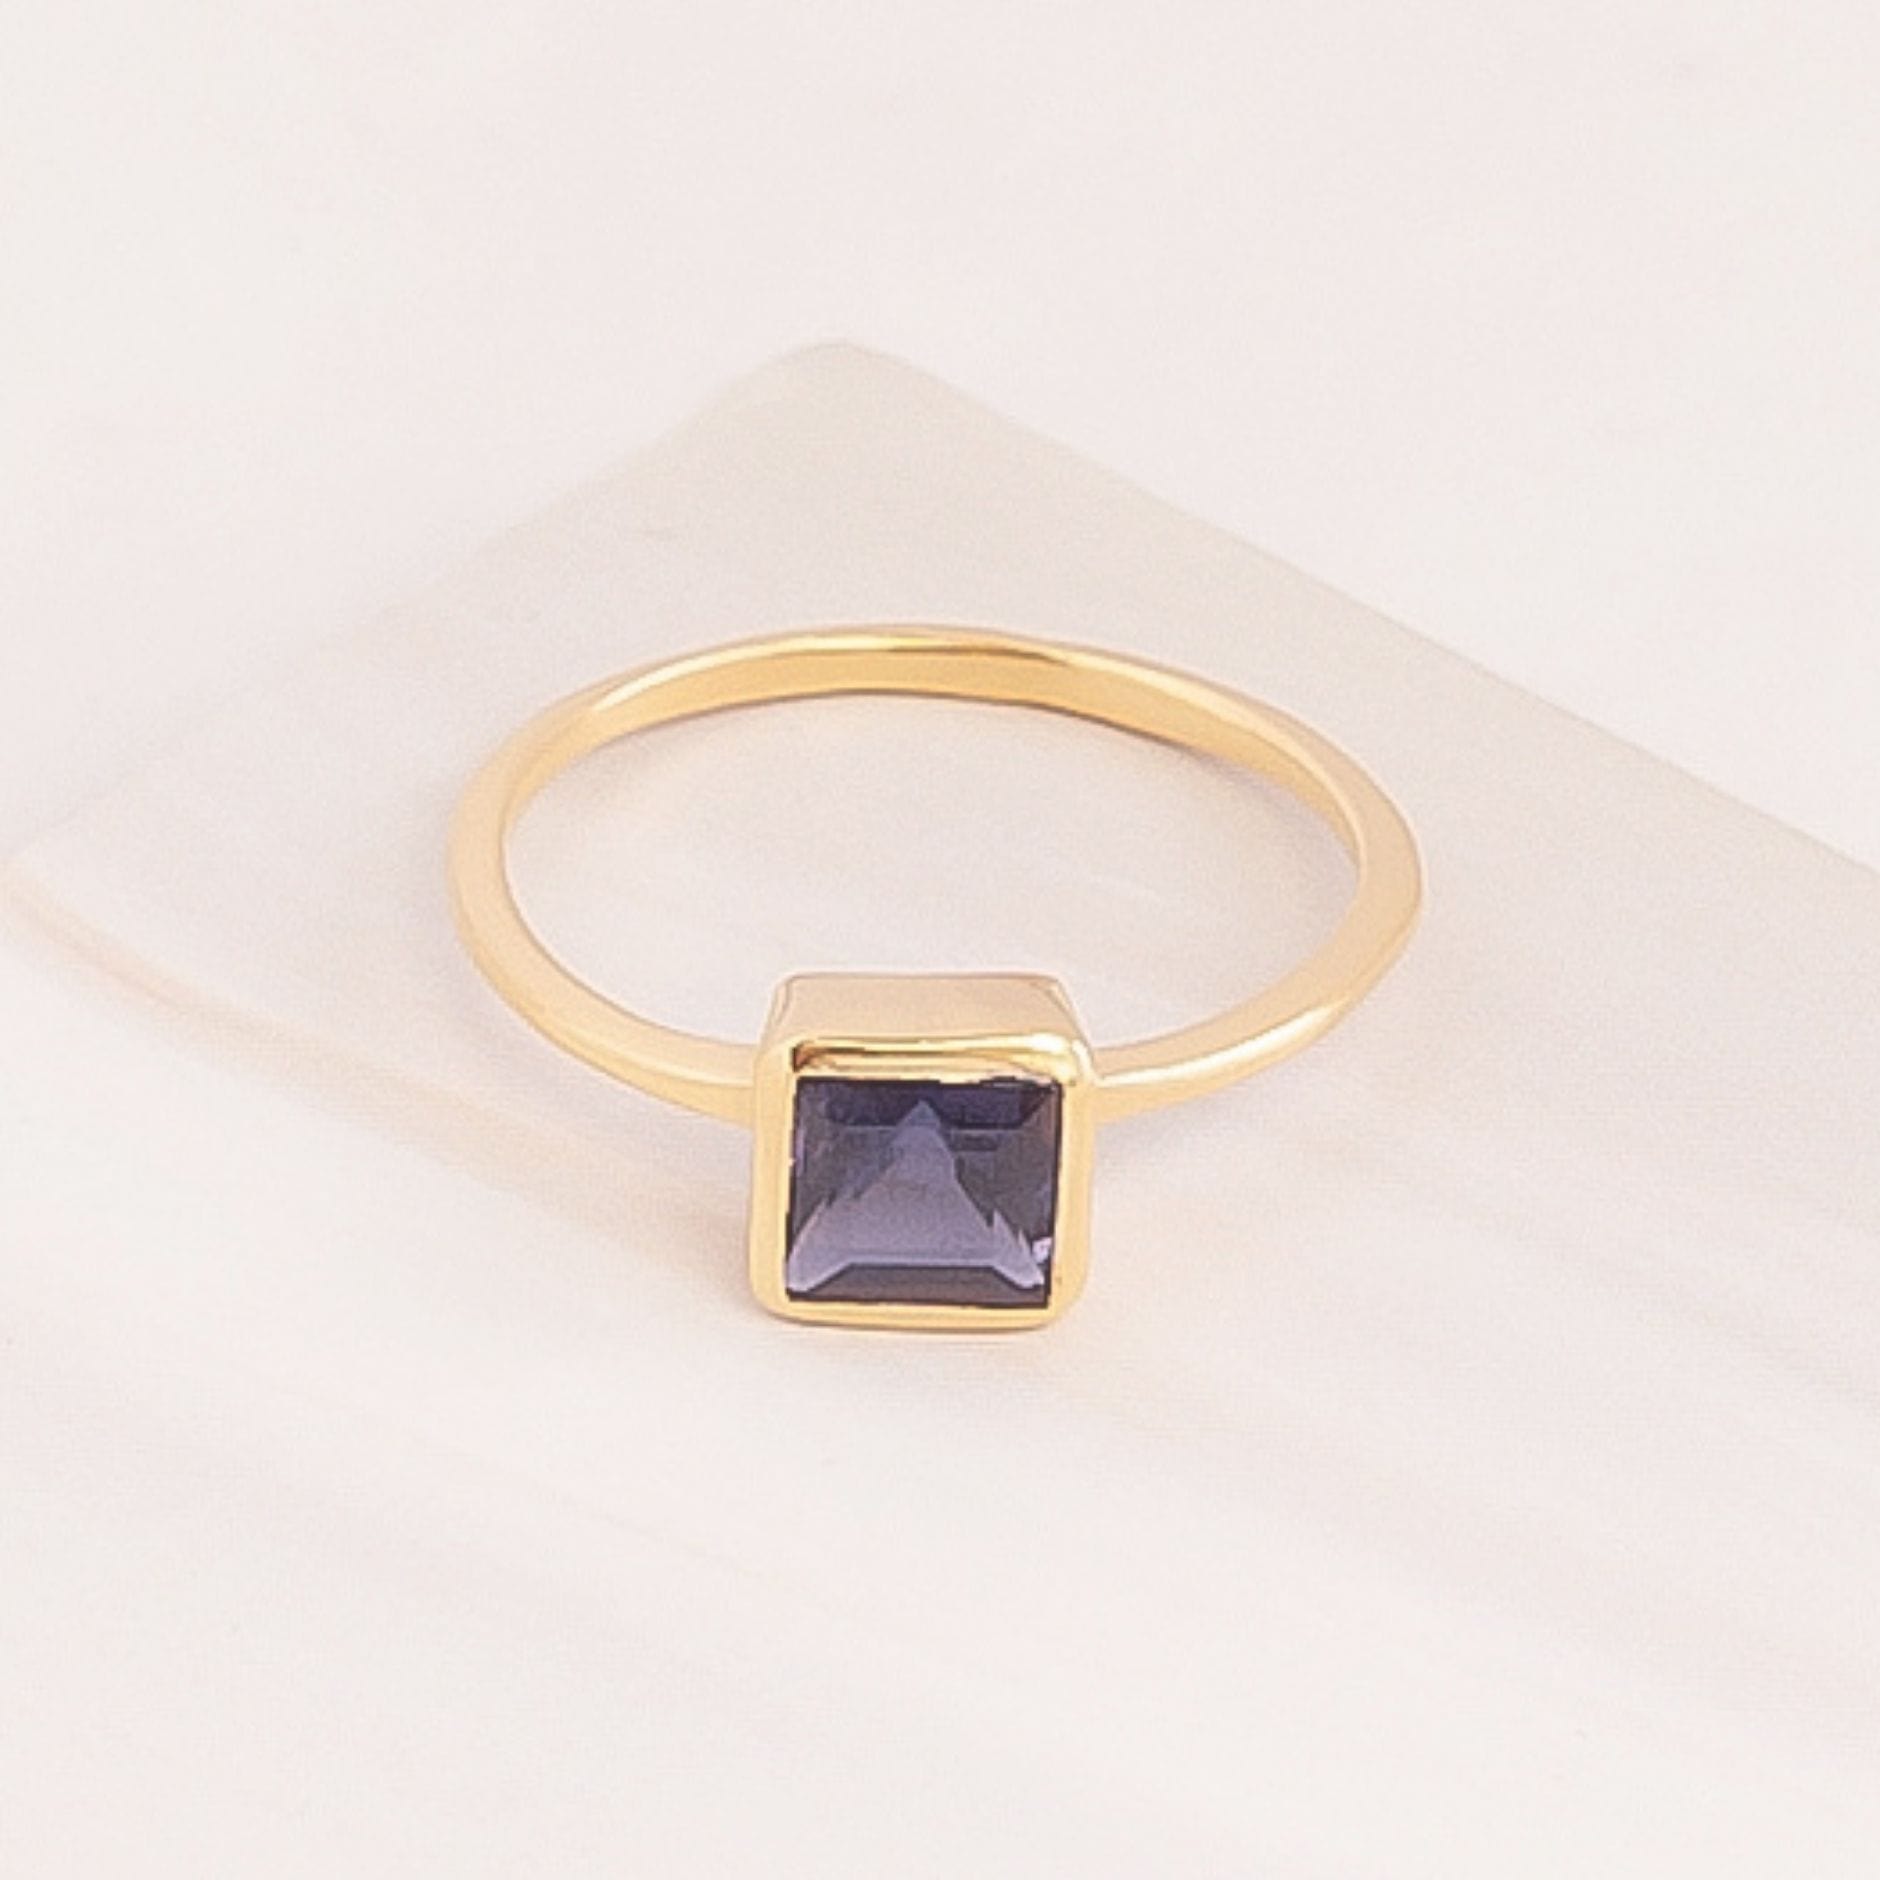 Emblem Jewelry Rings Blue Iolite / Square Signature Candy Gemstone Stack Rings (Ring Size 5)